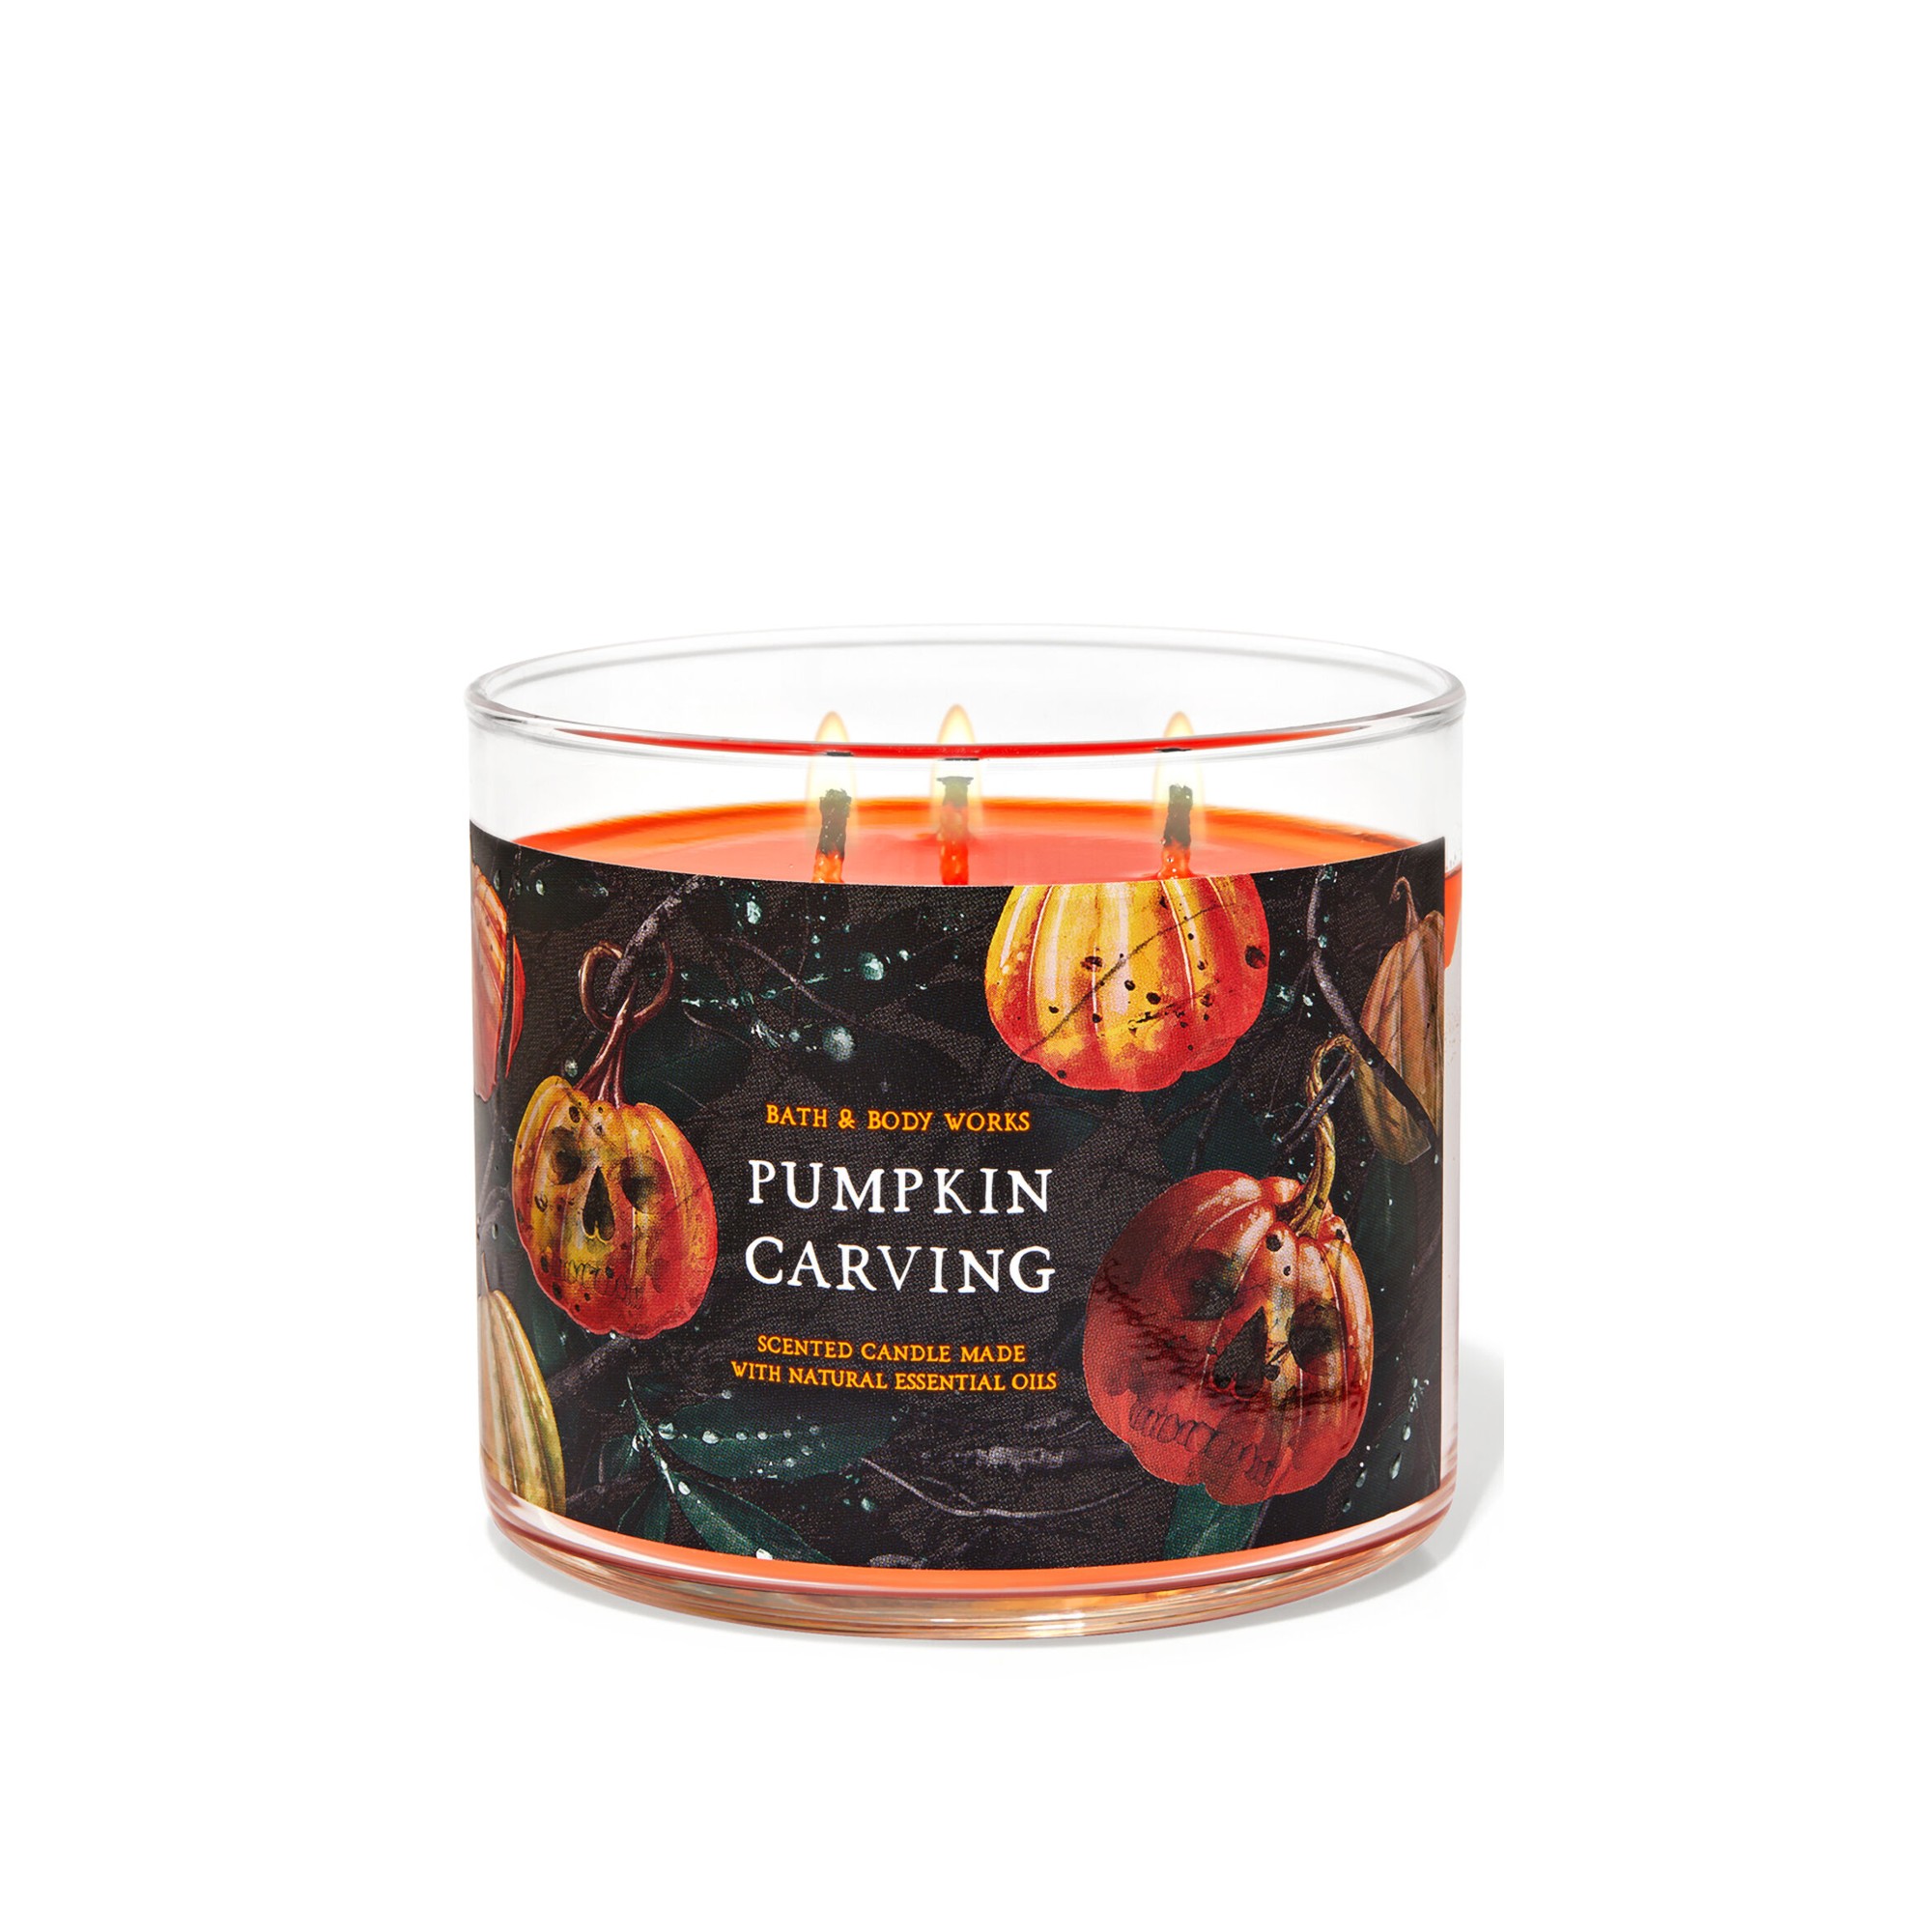 Bath & Body Works Pumpkin Carving 3 Wick Scented Candle